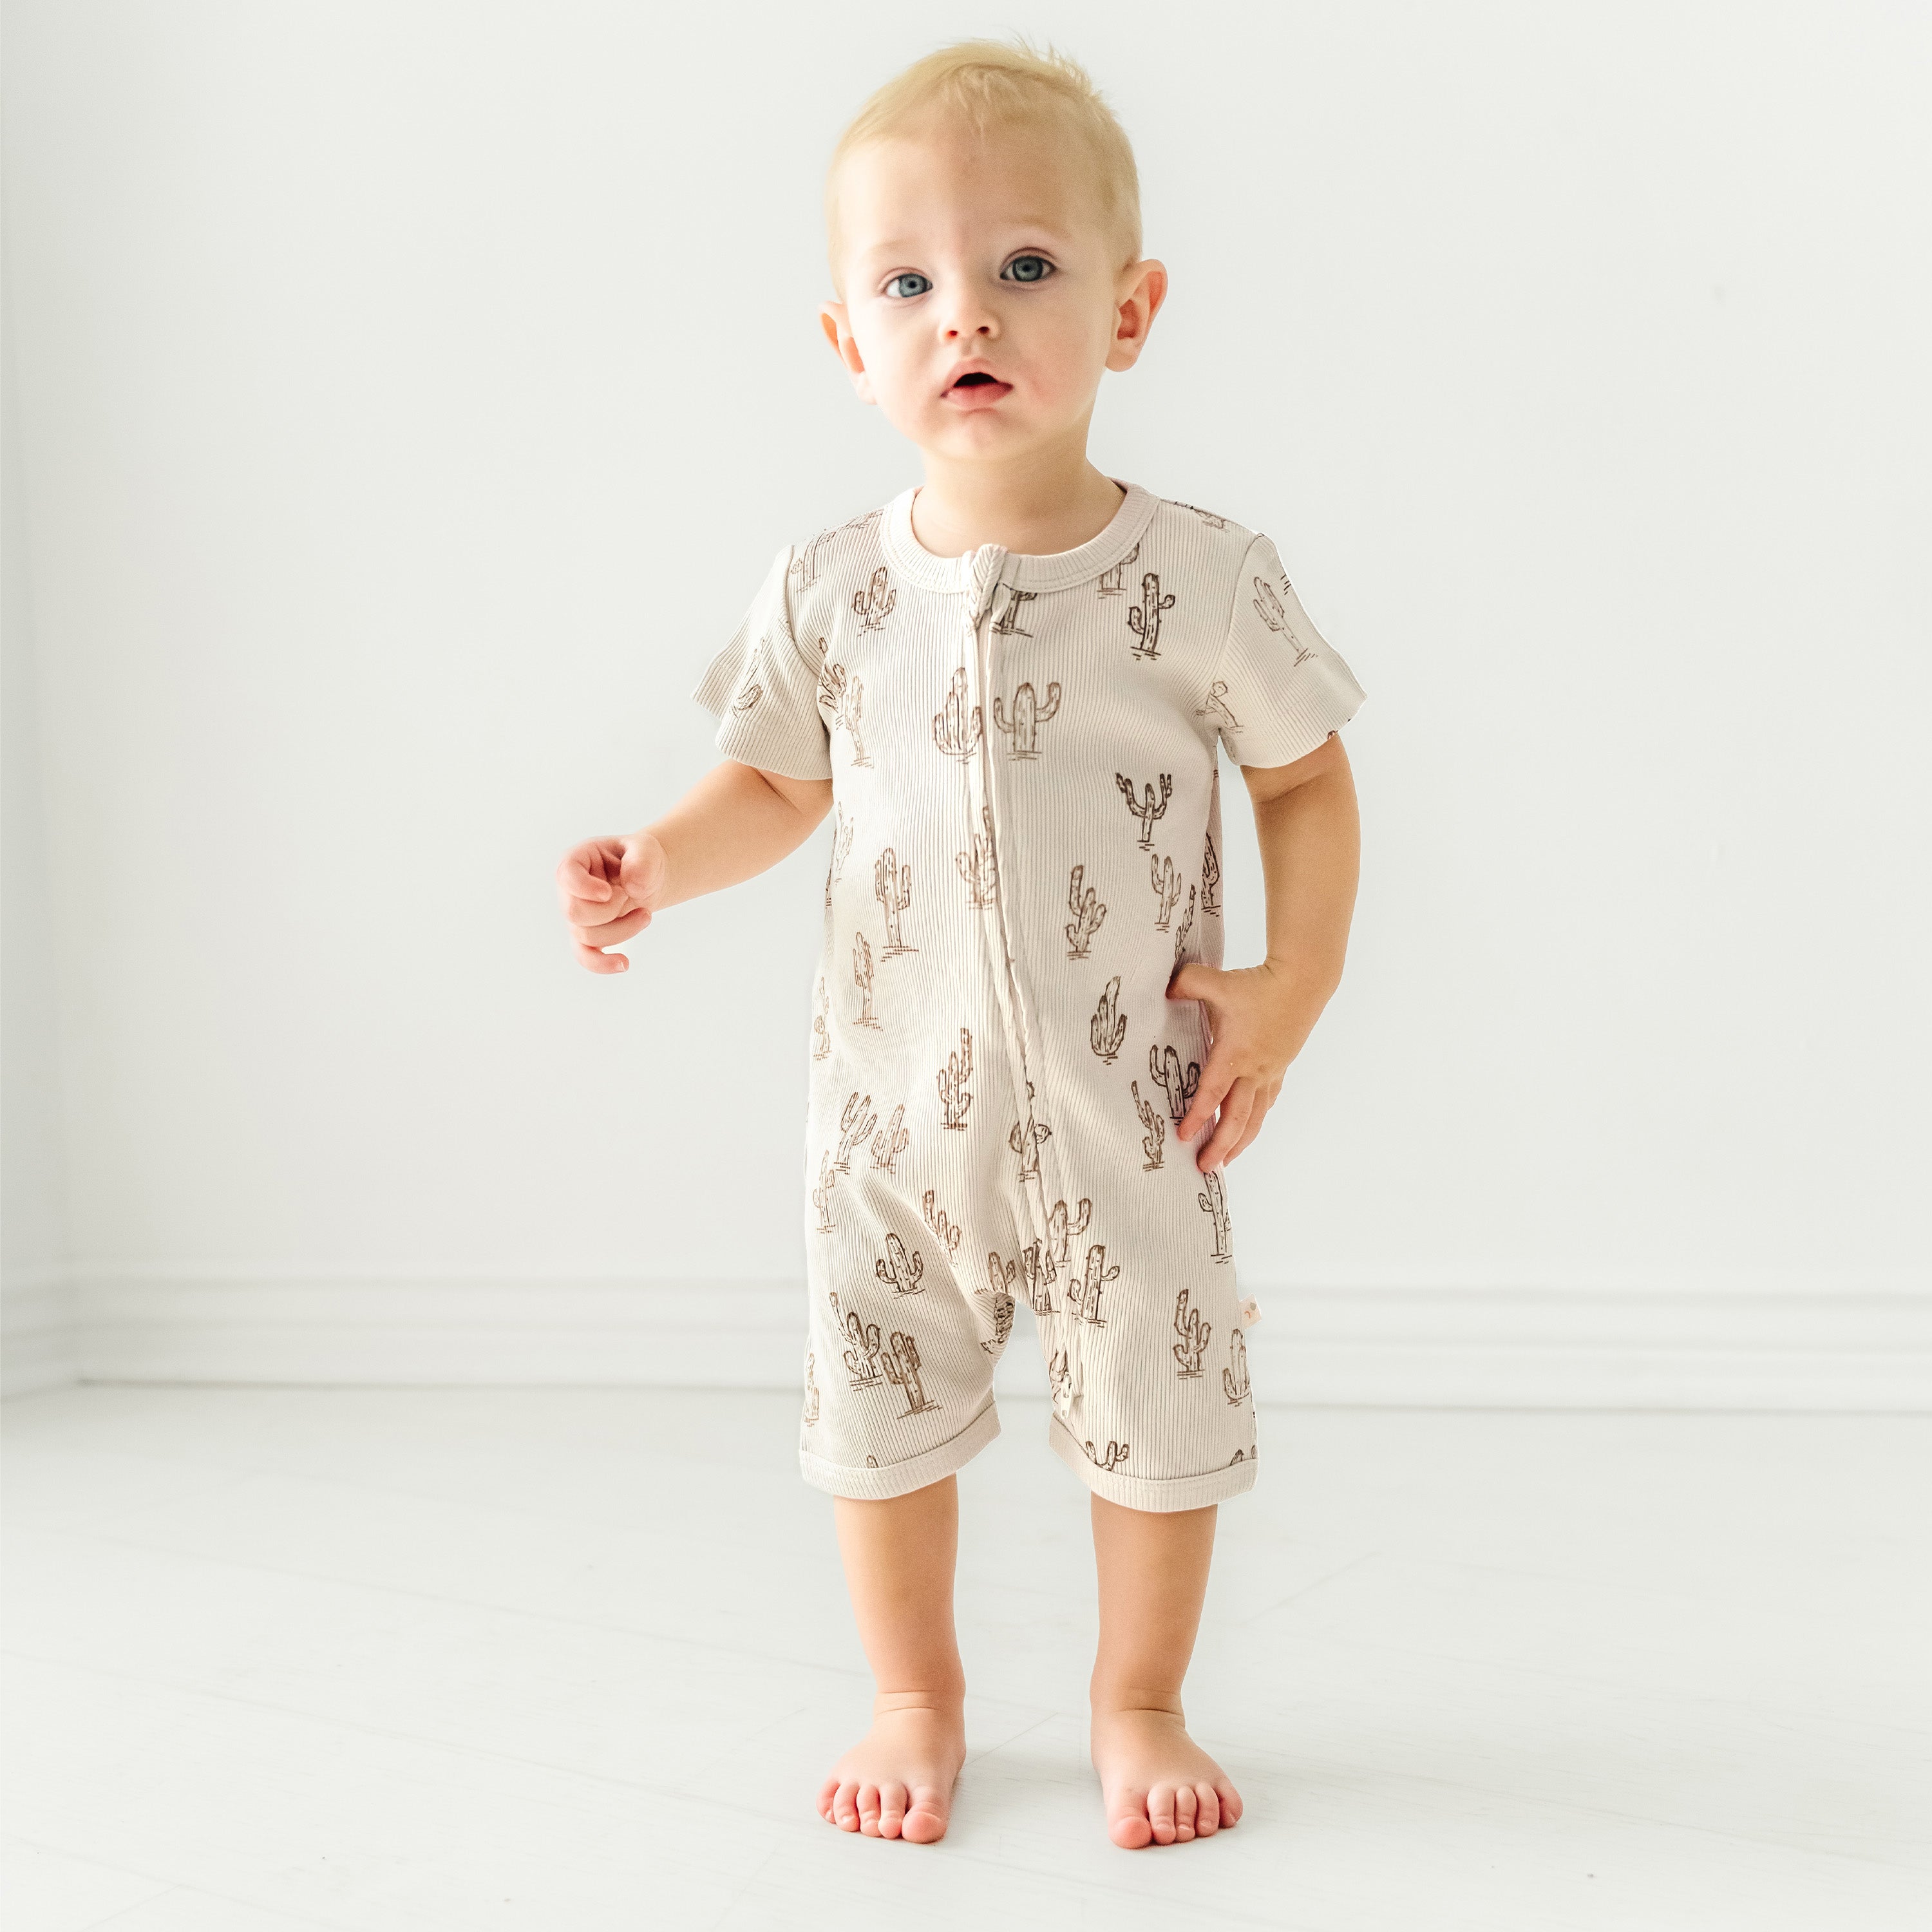 A toddler girl in a Makemake Organics Organic Short Zip Romper - Cactus standing barefoot on a white floor with a plain background, looking surprised.